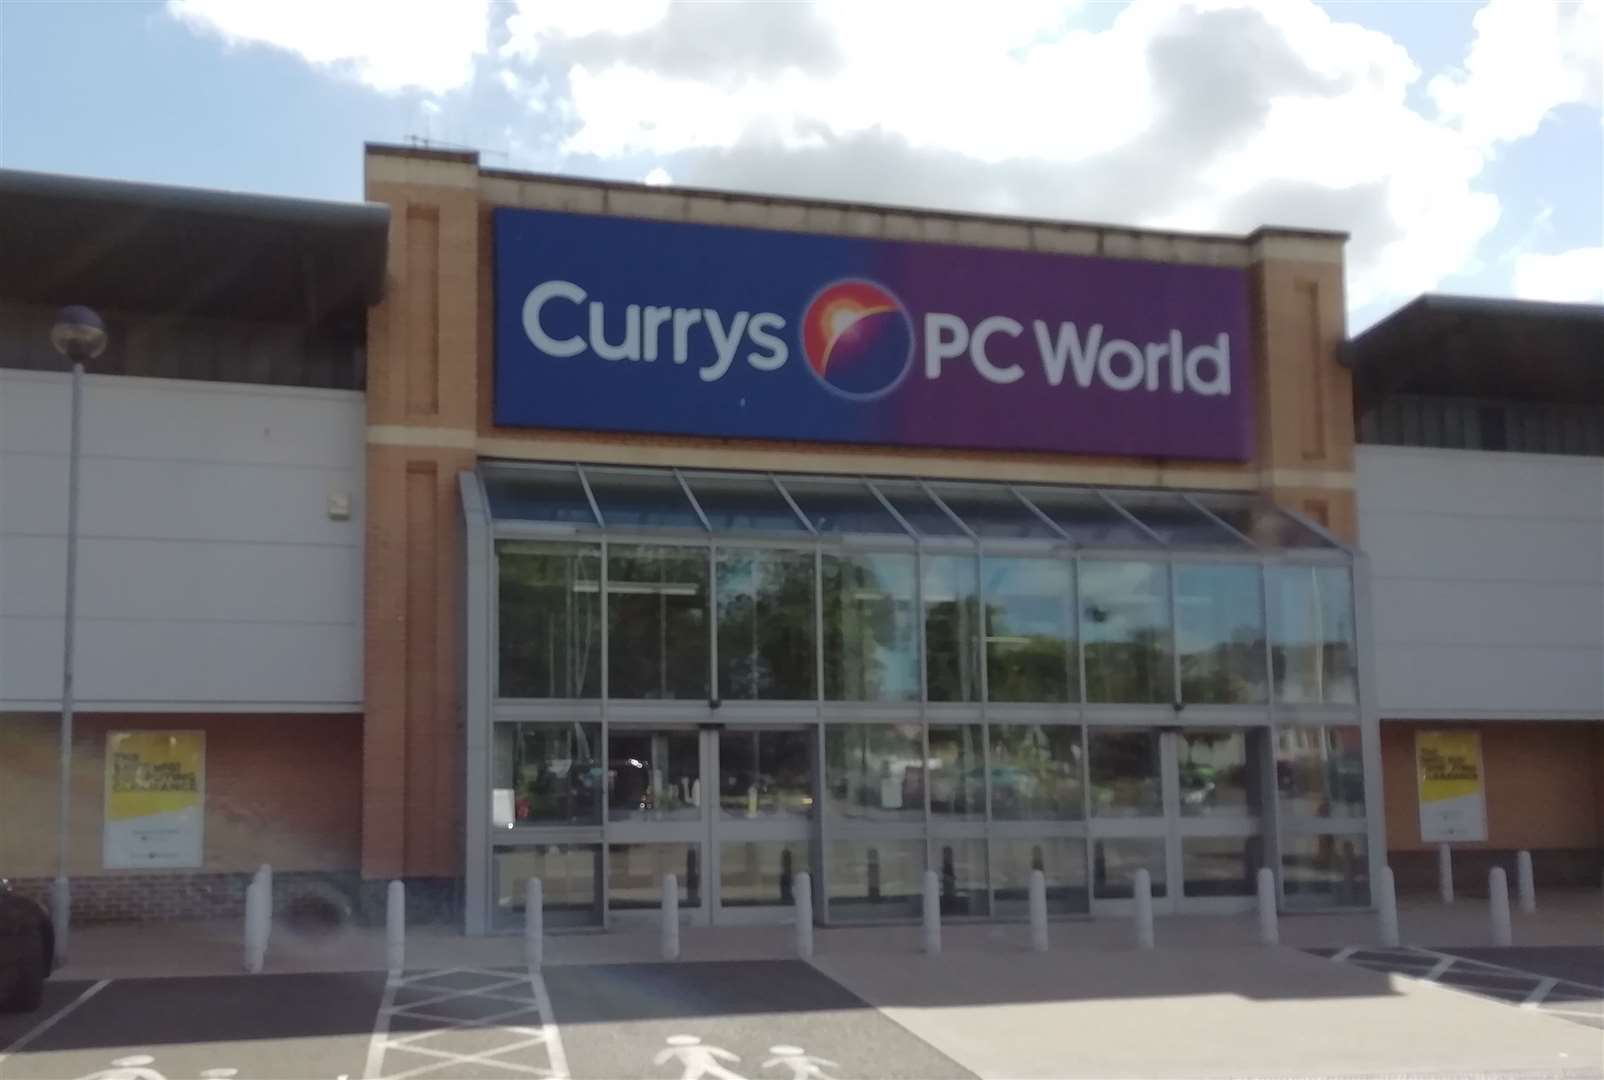 A number of Currys PC World stores will reopen on Monday